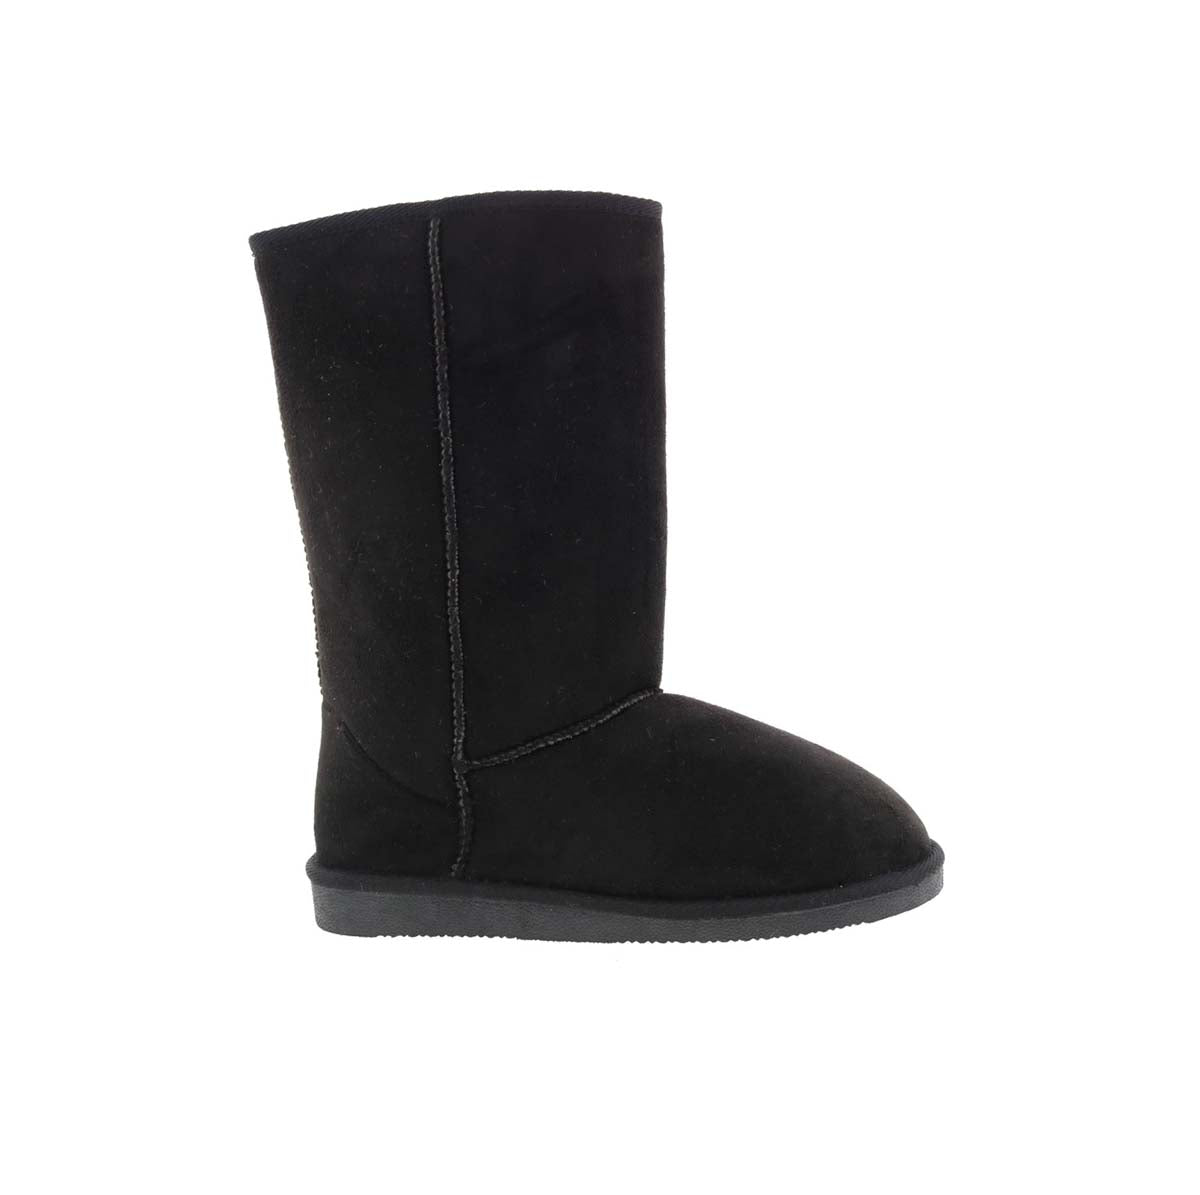 BELLINI AIRTIME WOMEN BOOT IN BLACK MICROSUEDE - TLW Shoes